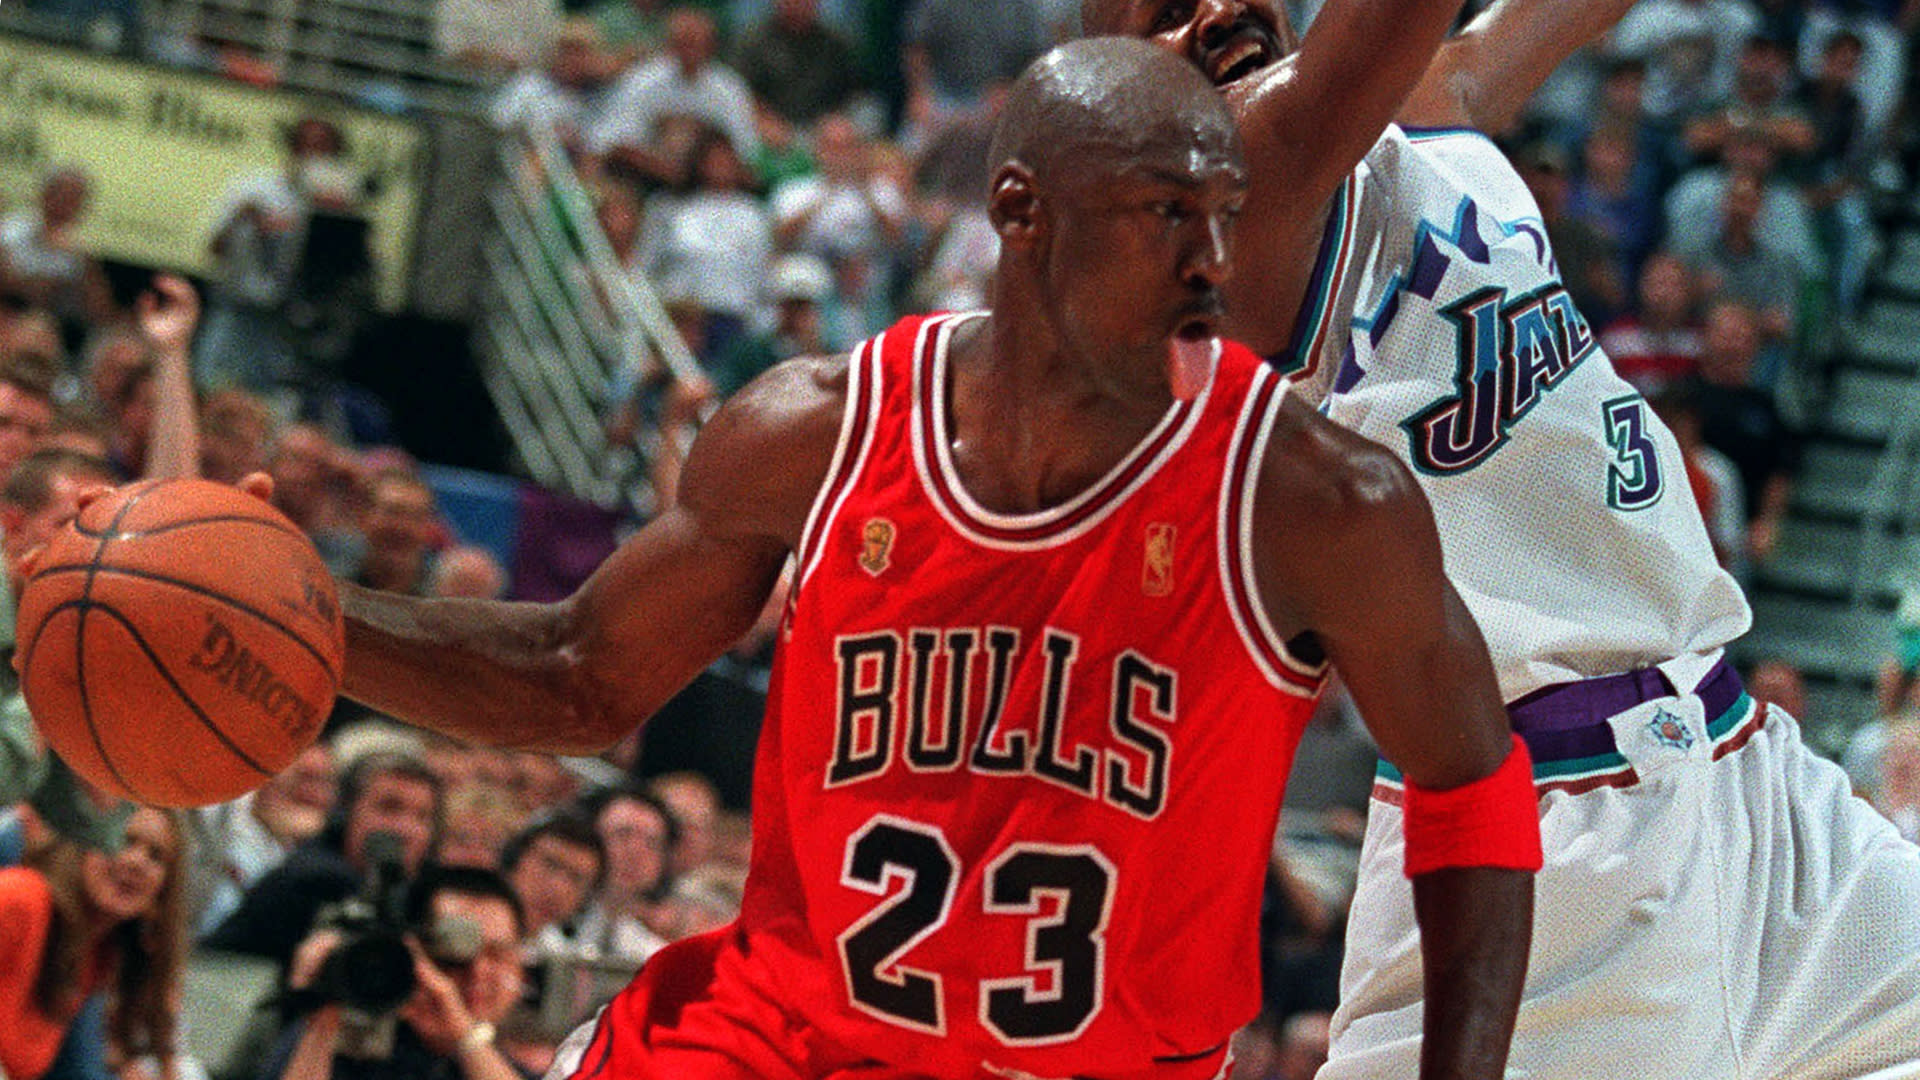 ESPN to show film about Game 6 of 1998 NBA Finals – Brandon Sun